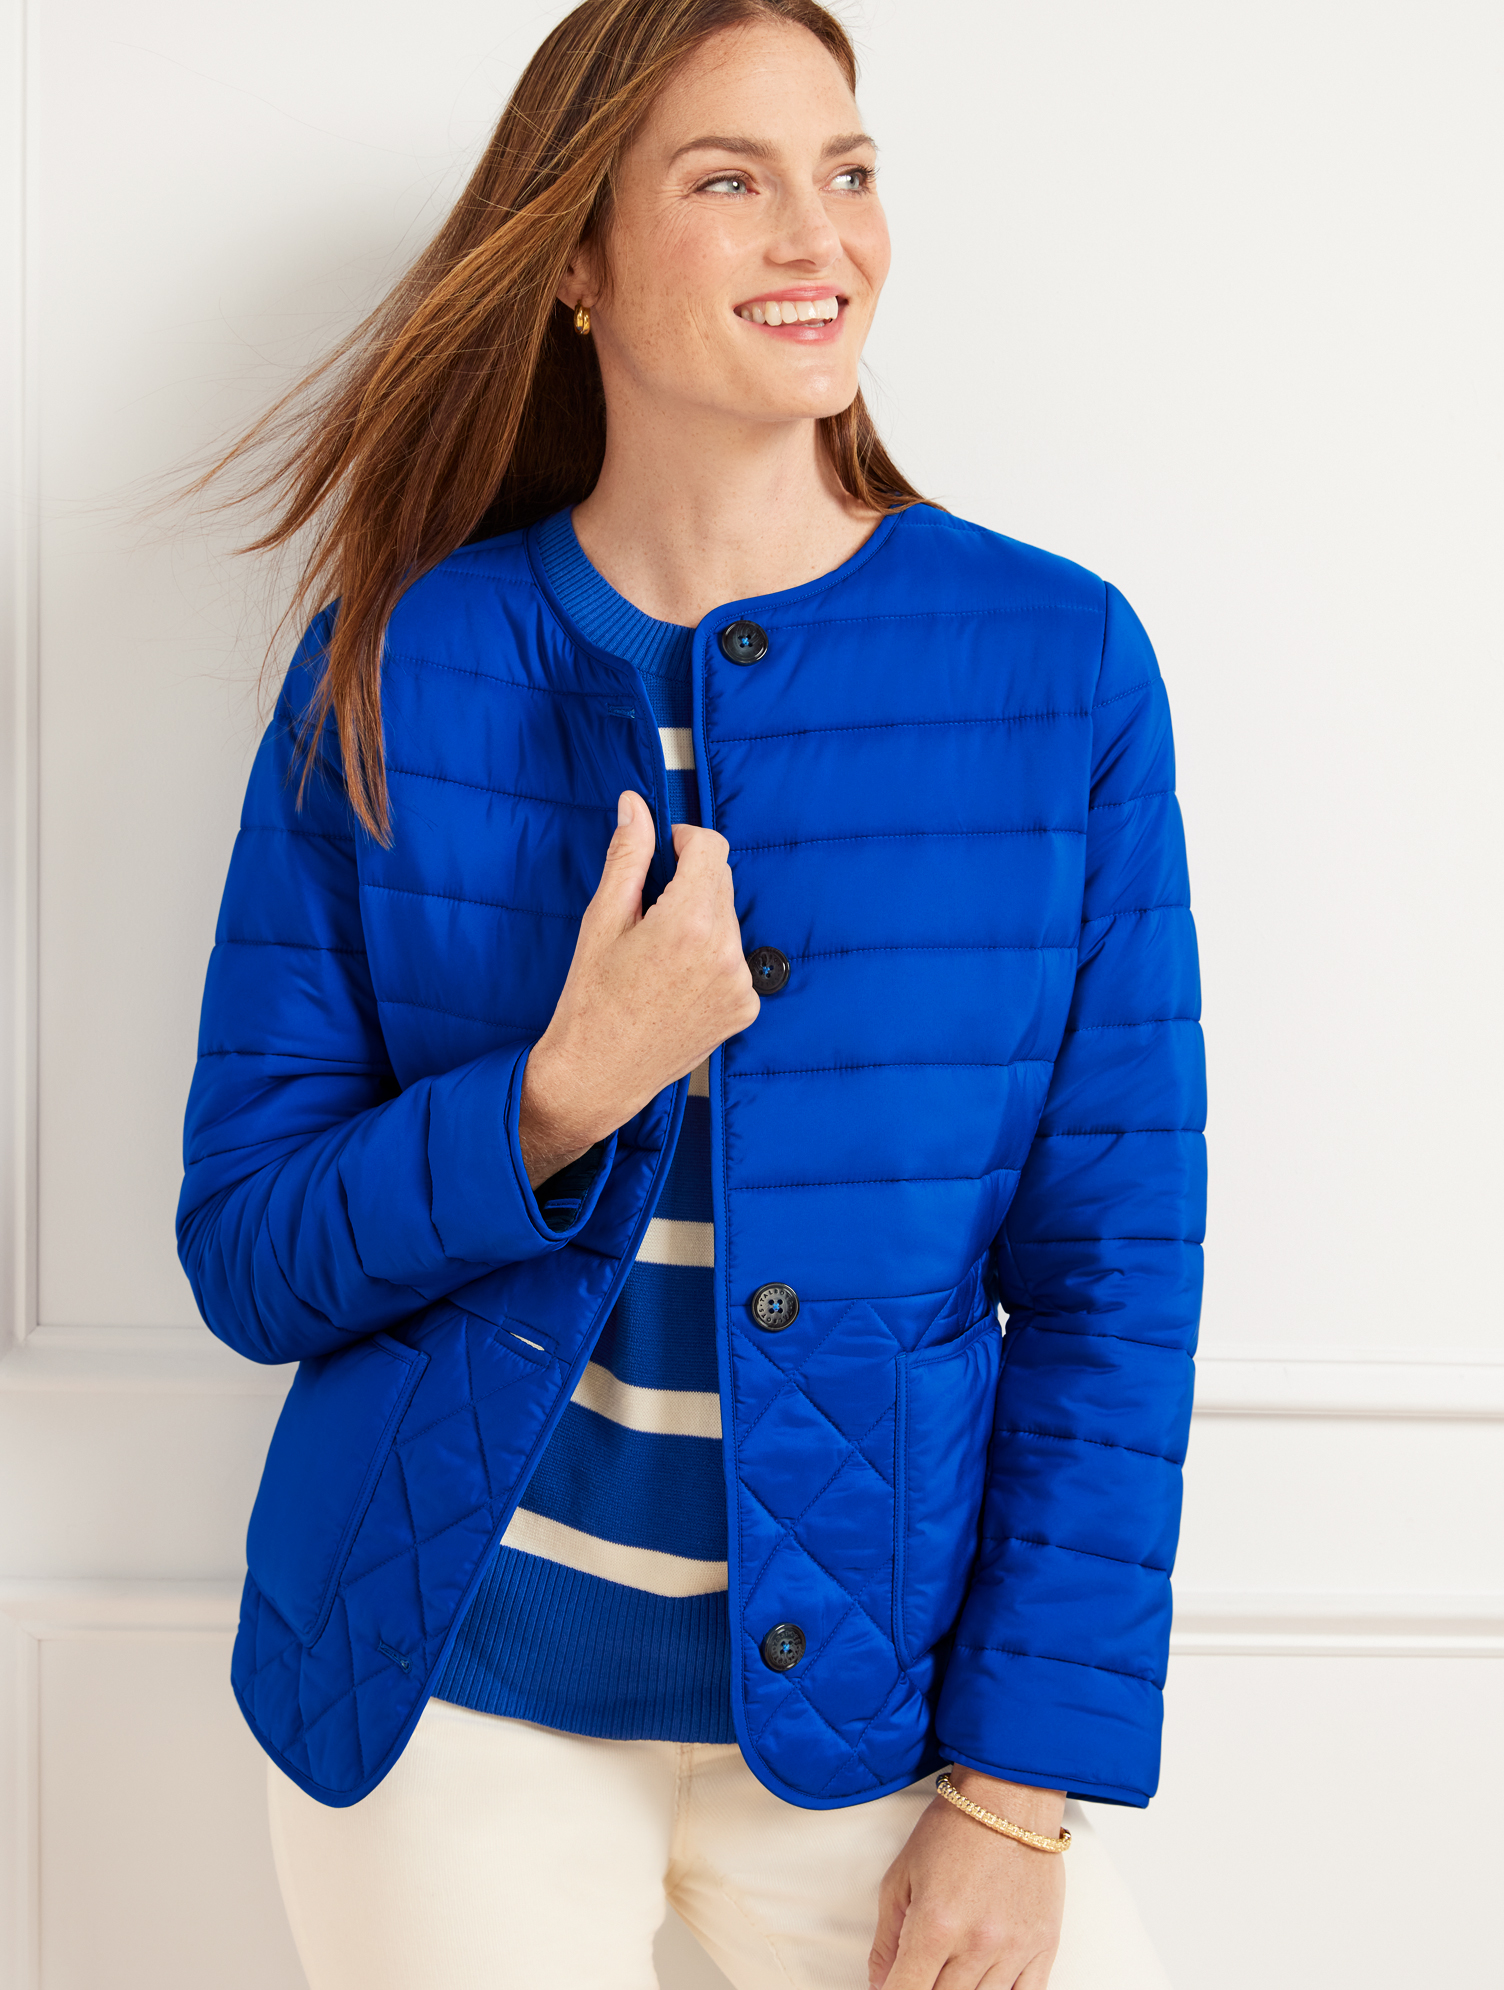 Talbots Quilted Collarless Jacket - Blue Majesty - 3x